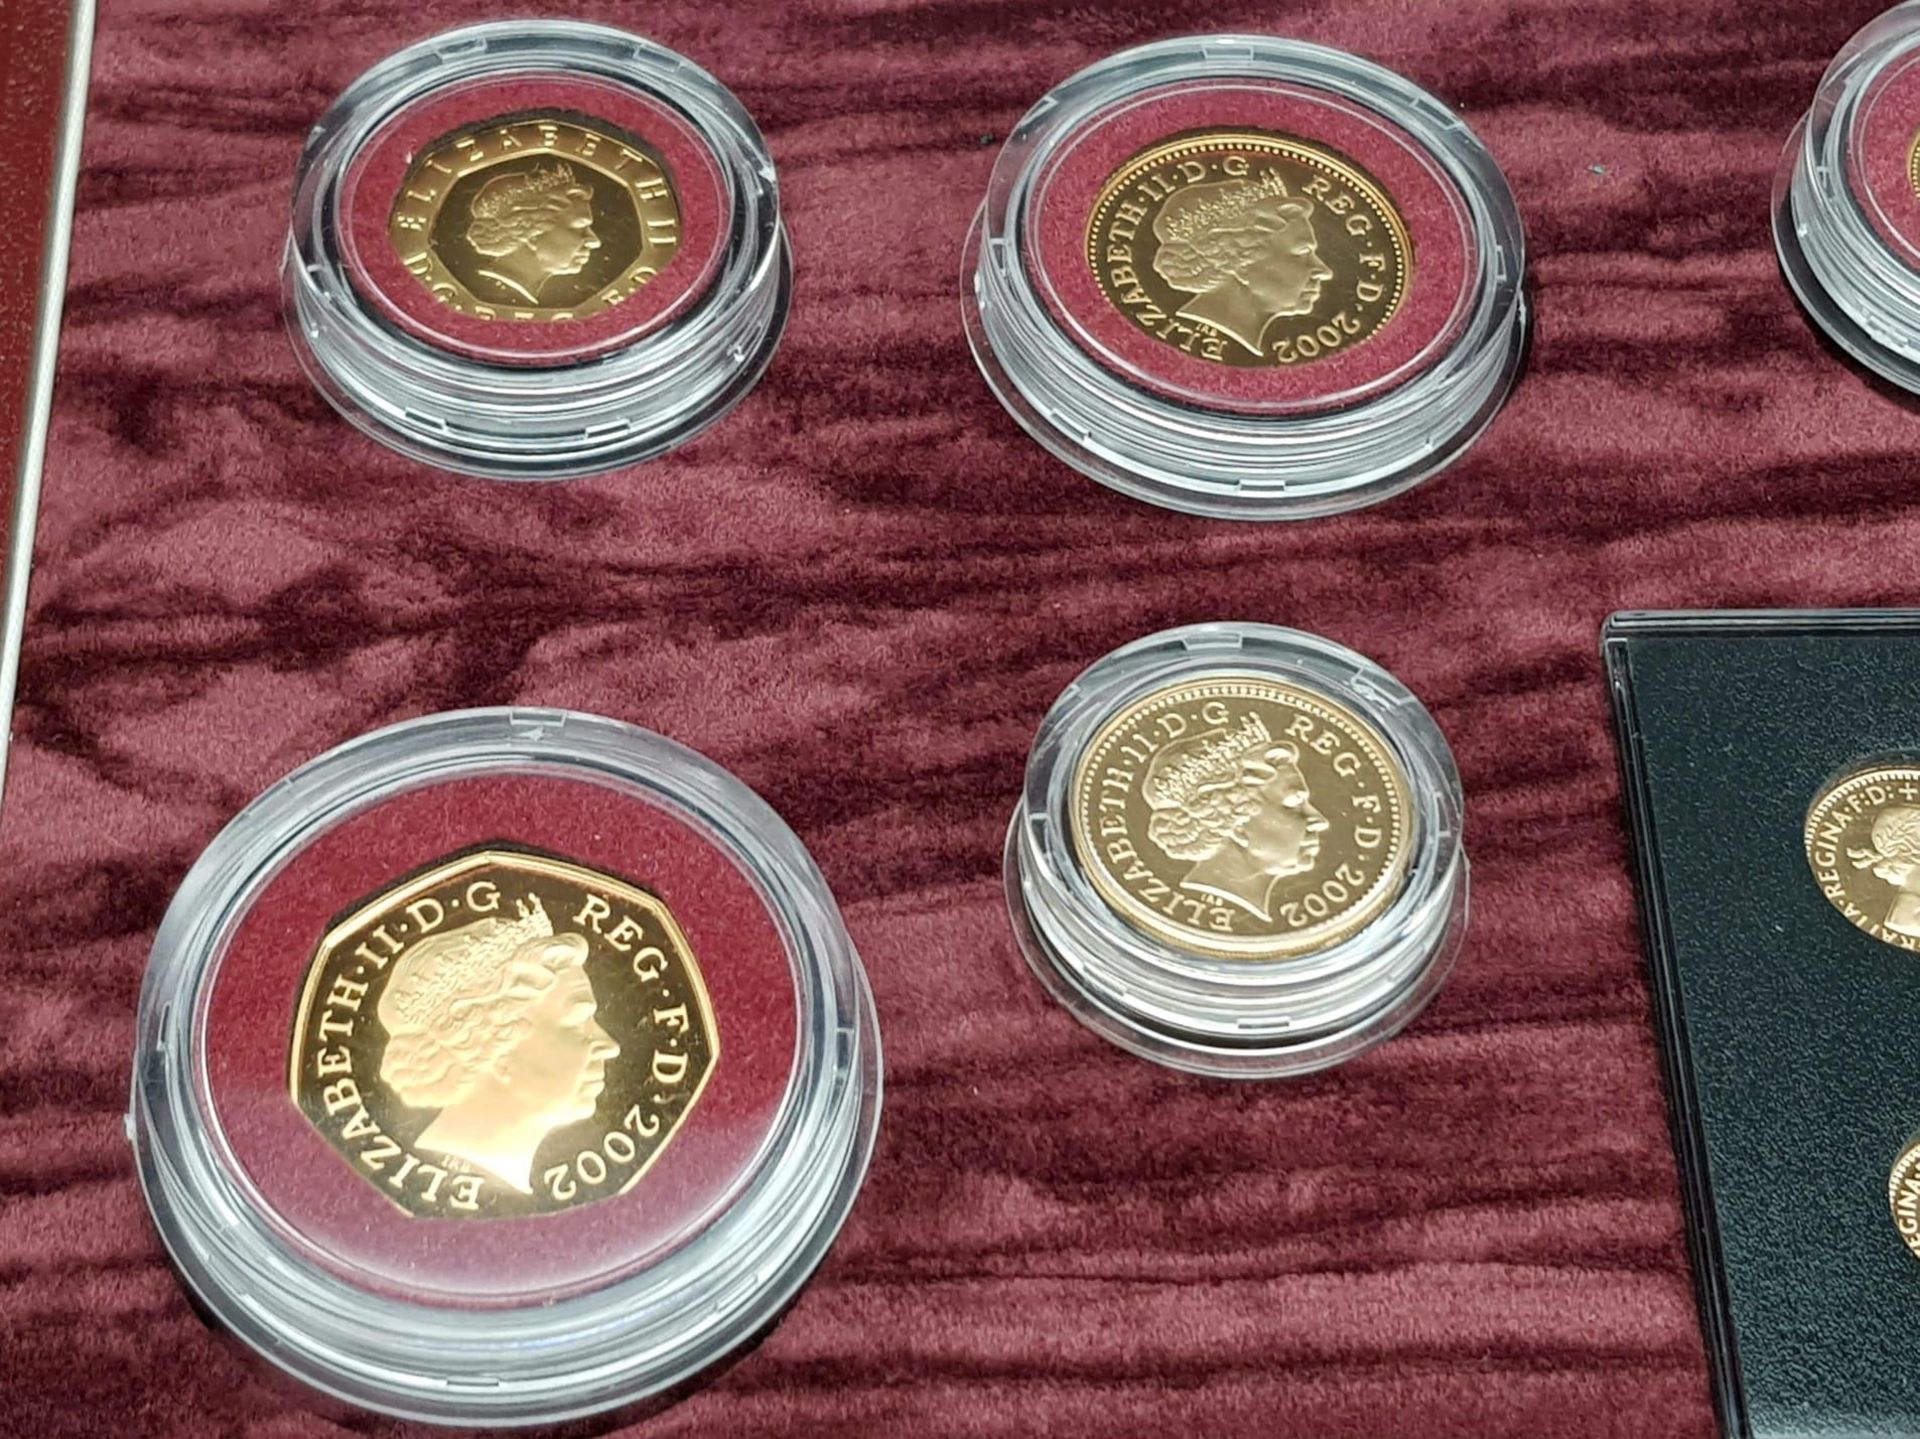 A Breathtaking Limited Edition 2002 Golden Jubilee 22K Gold Proof Coin Set. This set contains a - Image 7 of 21